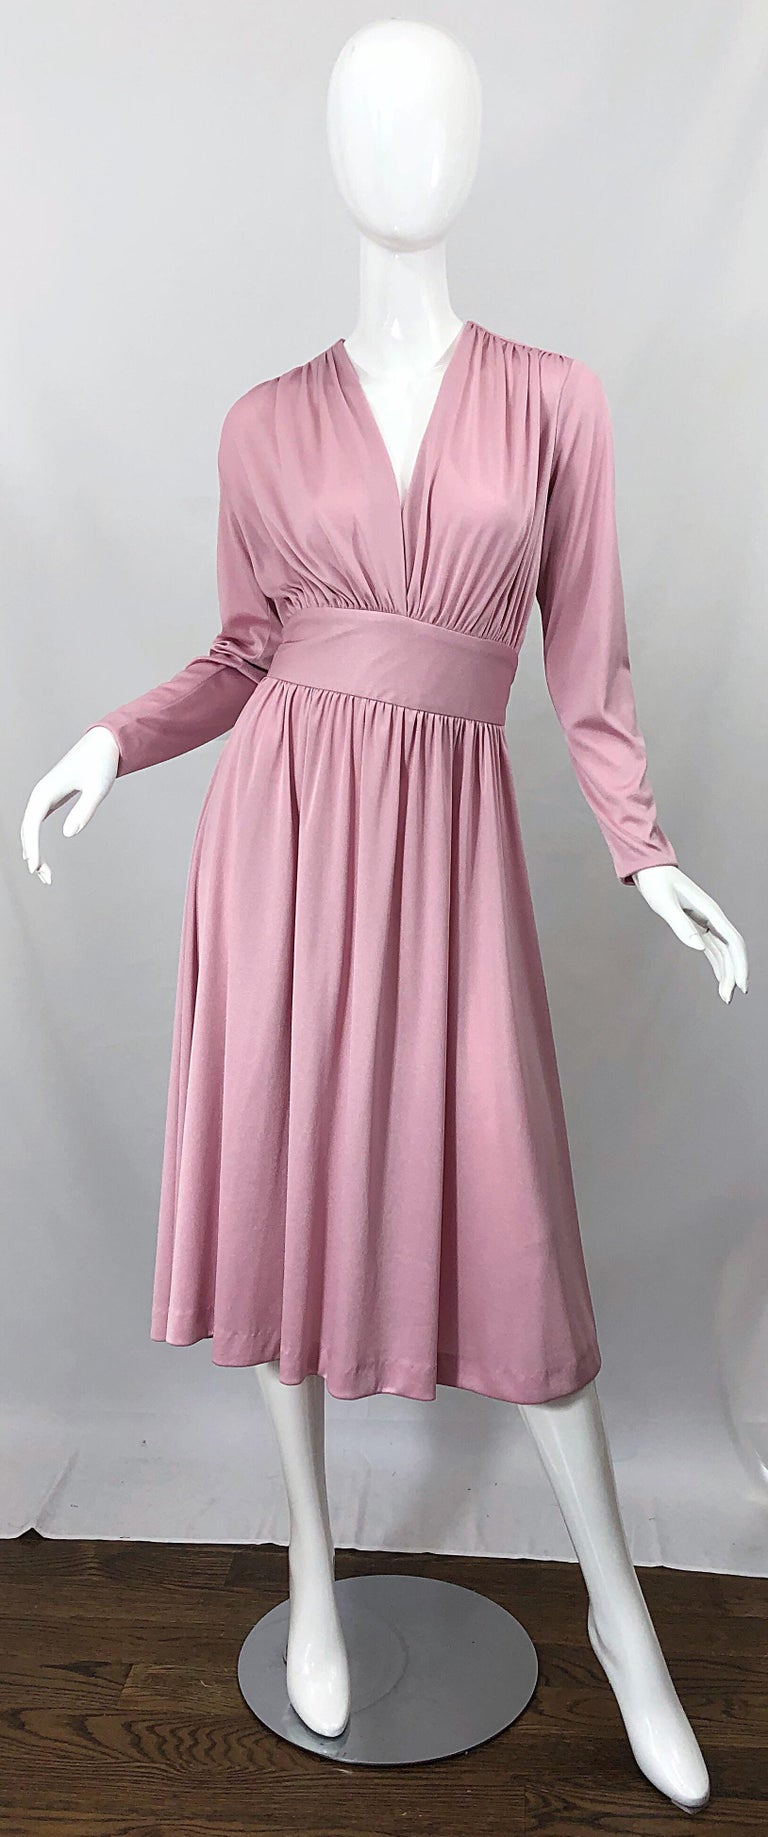 Chic 1970s JOY STEVENS pink / mauve long sleeve jersey dress! Perfectly cut v-neck reveals just the right amount of cleavage. Simply slips over the head and ties in the back to fit an array of sizes. Soft jersey fabric stretches to fit. Can easily